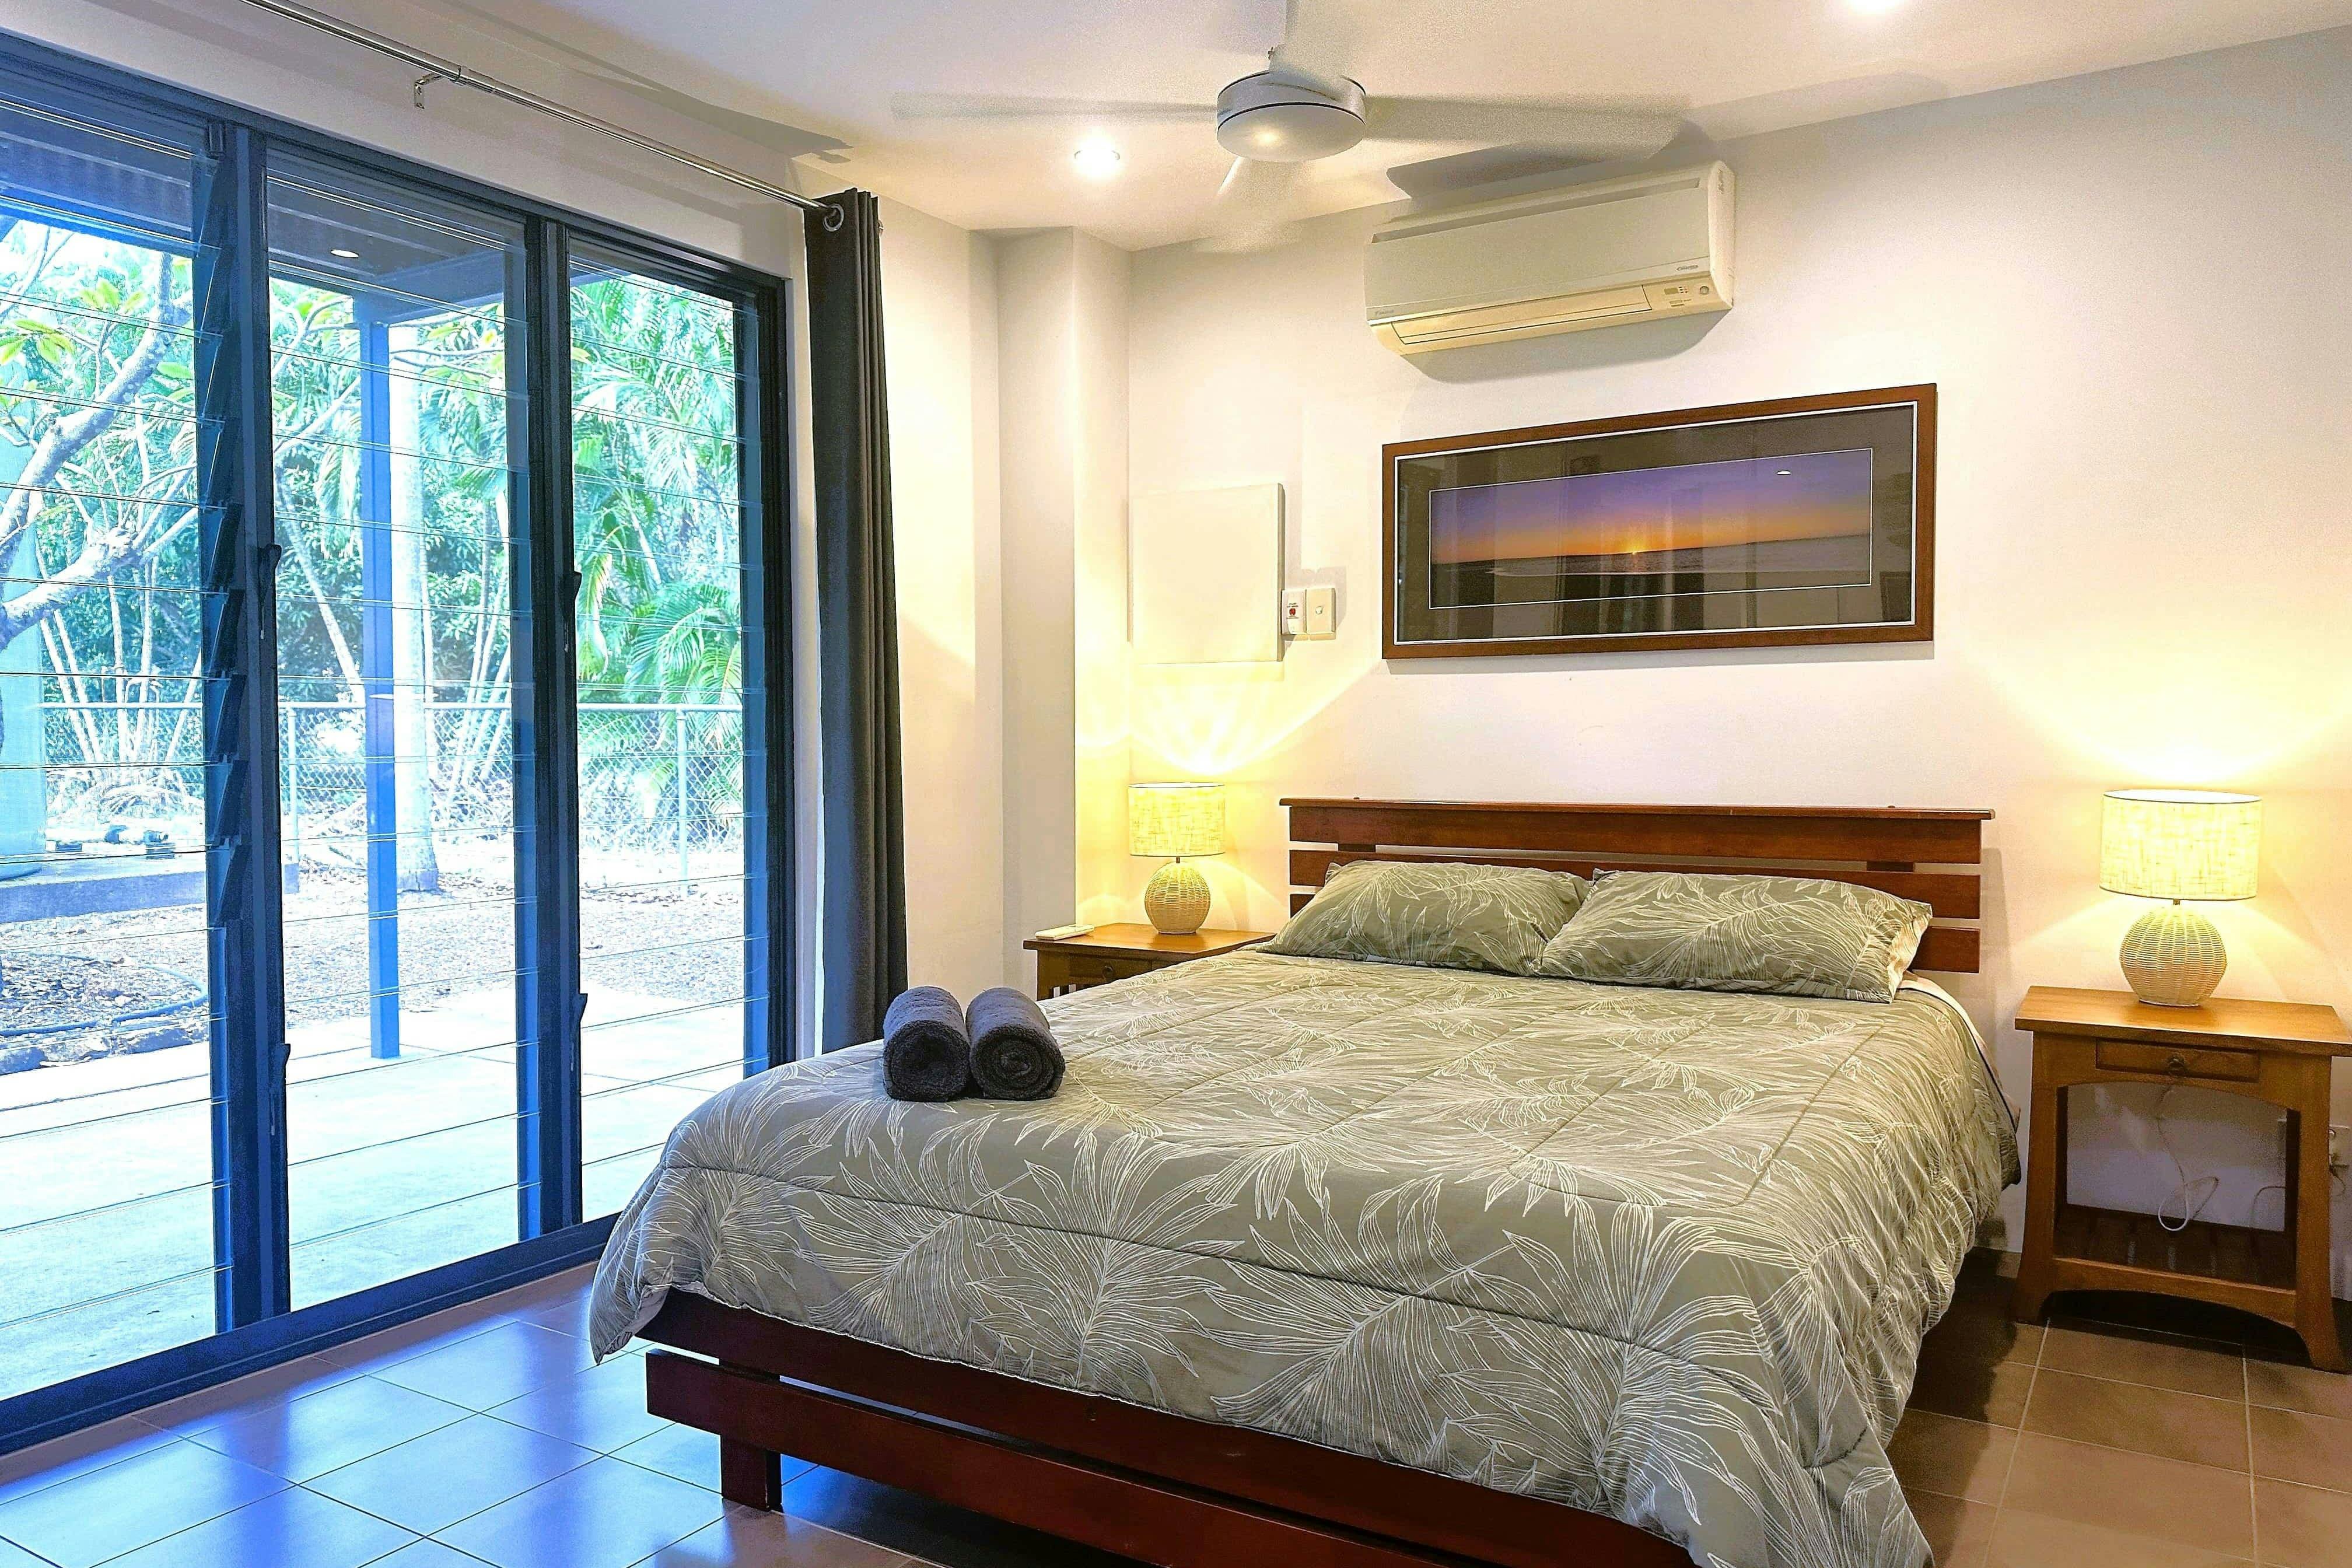 Air Conditioned Queen Bedroom with Ensuite and Garden View